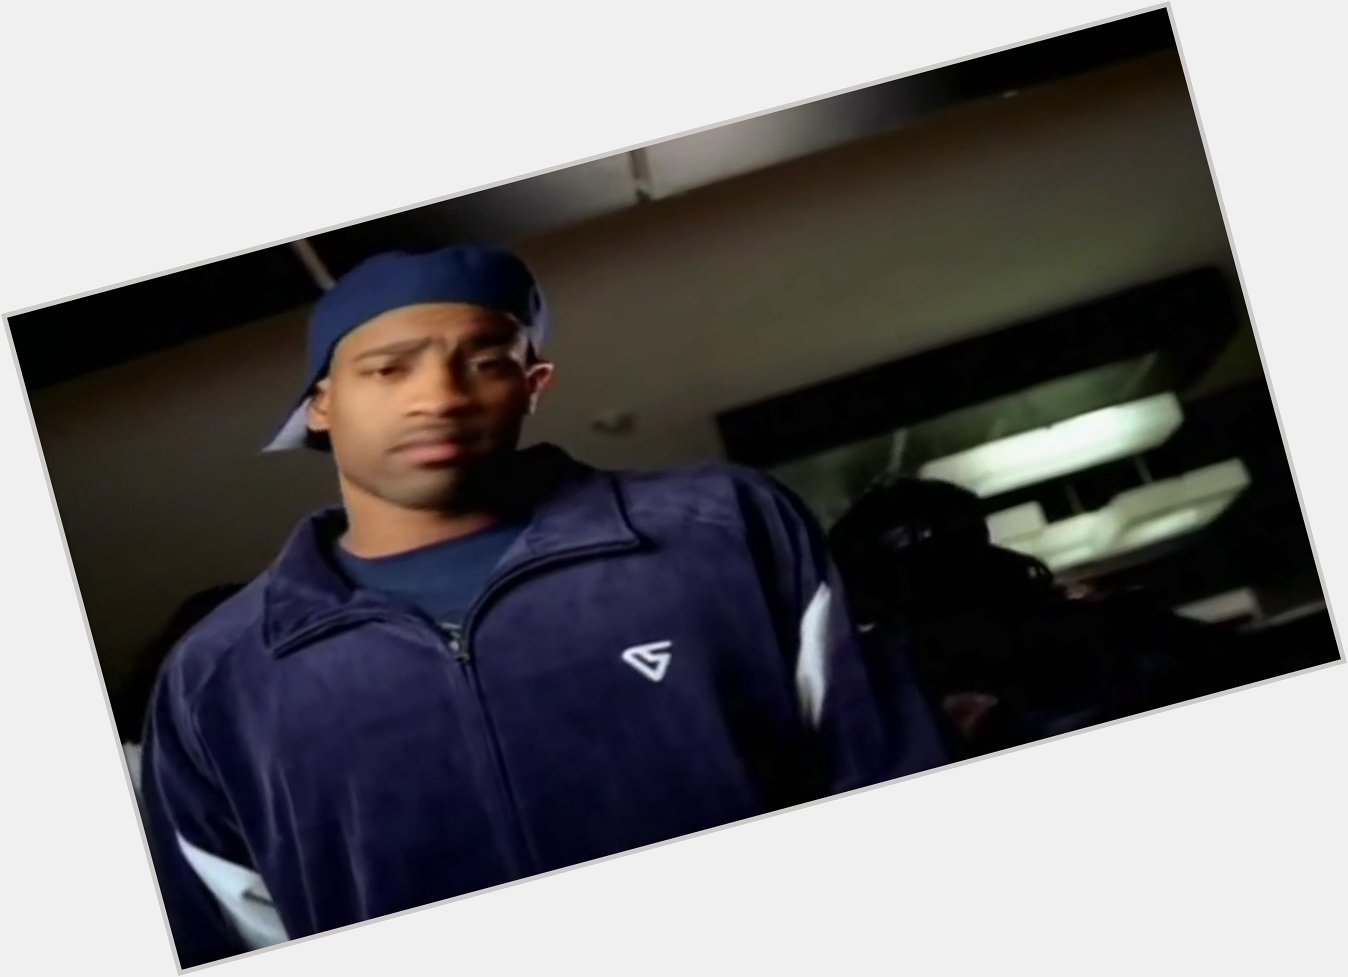 Happy Birthday to Vince Carter, who at one point was not about this bottle of Hpnotiq in this Fabolous video: 